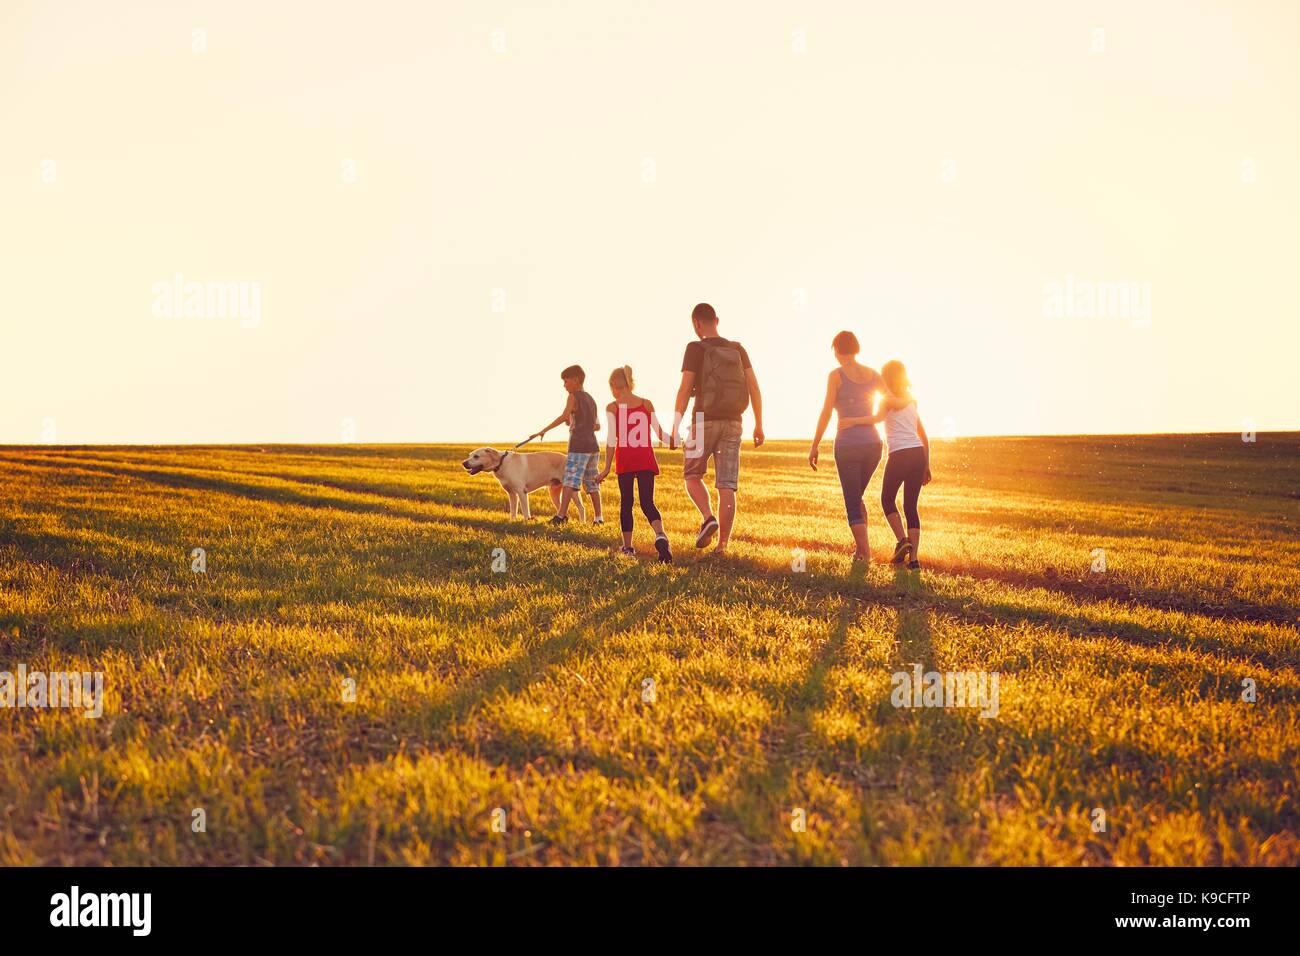 Summertime in the countryside. Silhouettes of the family with dog on the trip at the sunset. Stock Photo